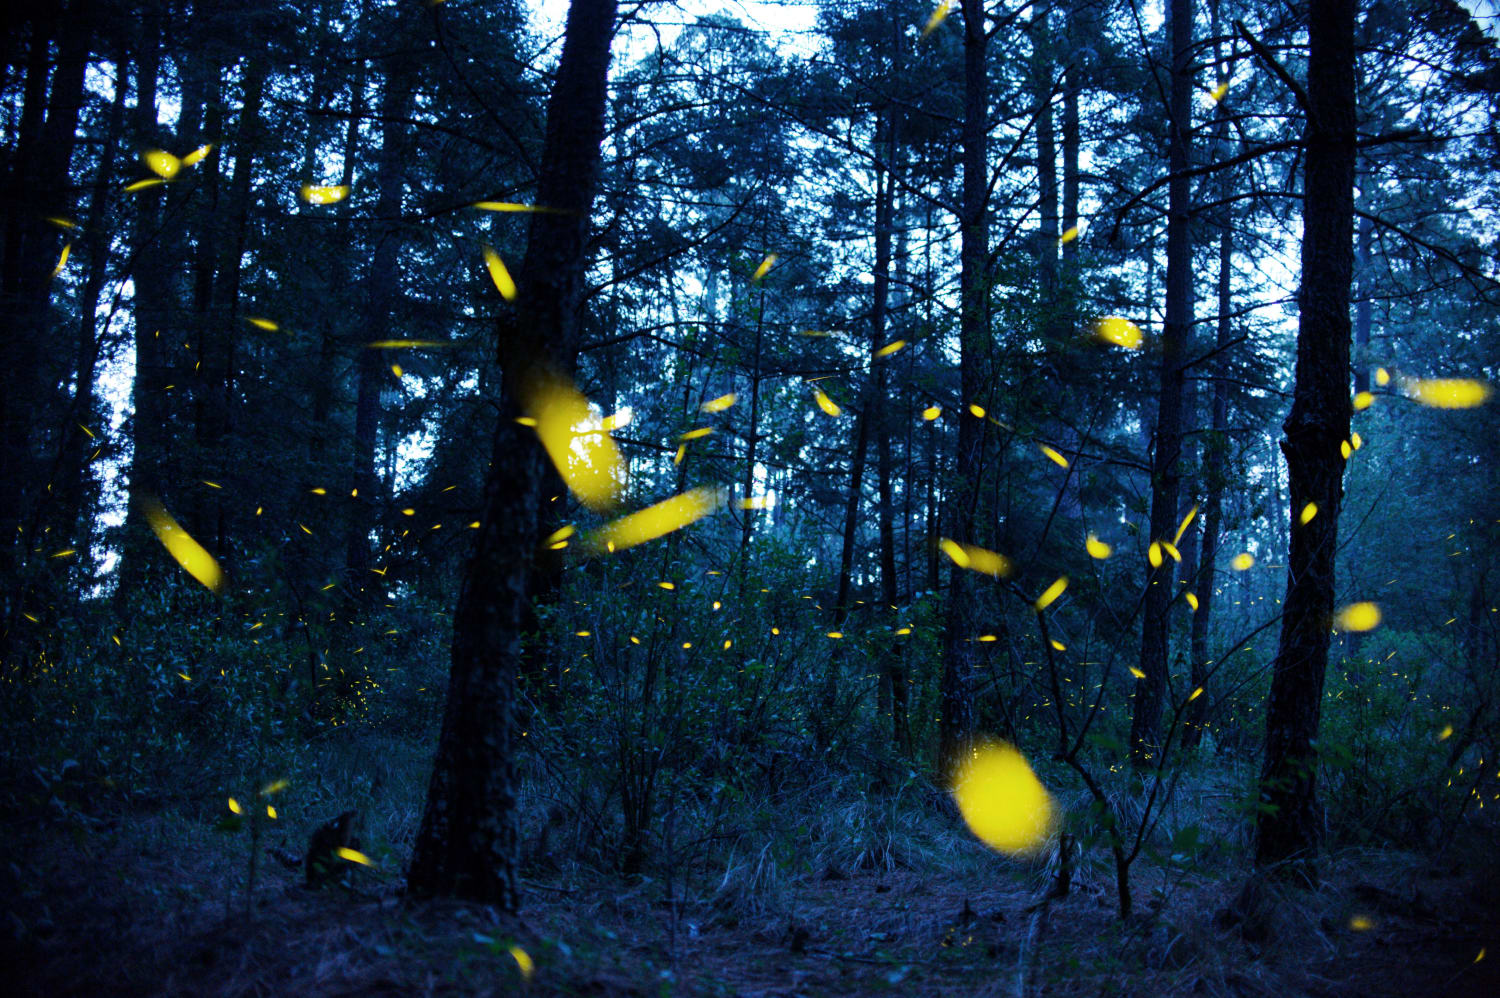 What Makes Fireflies Beautifully Light Up?